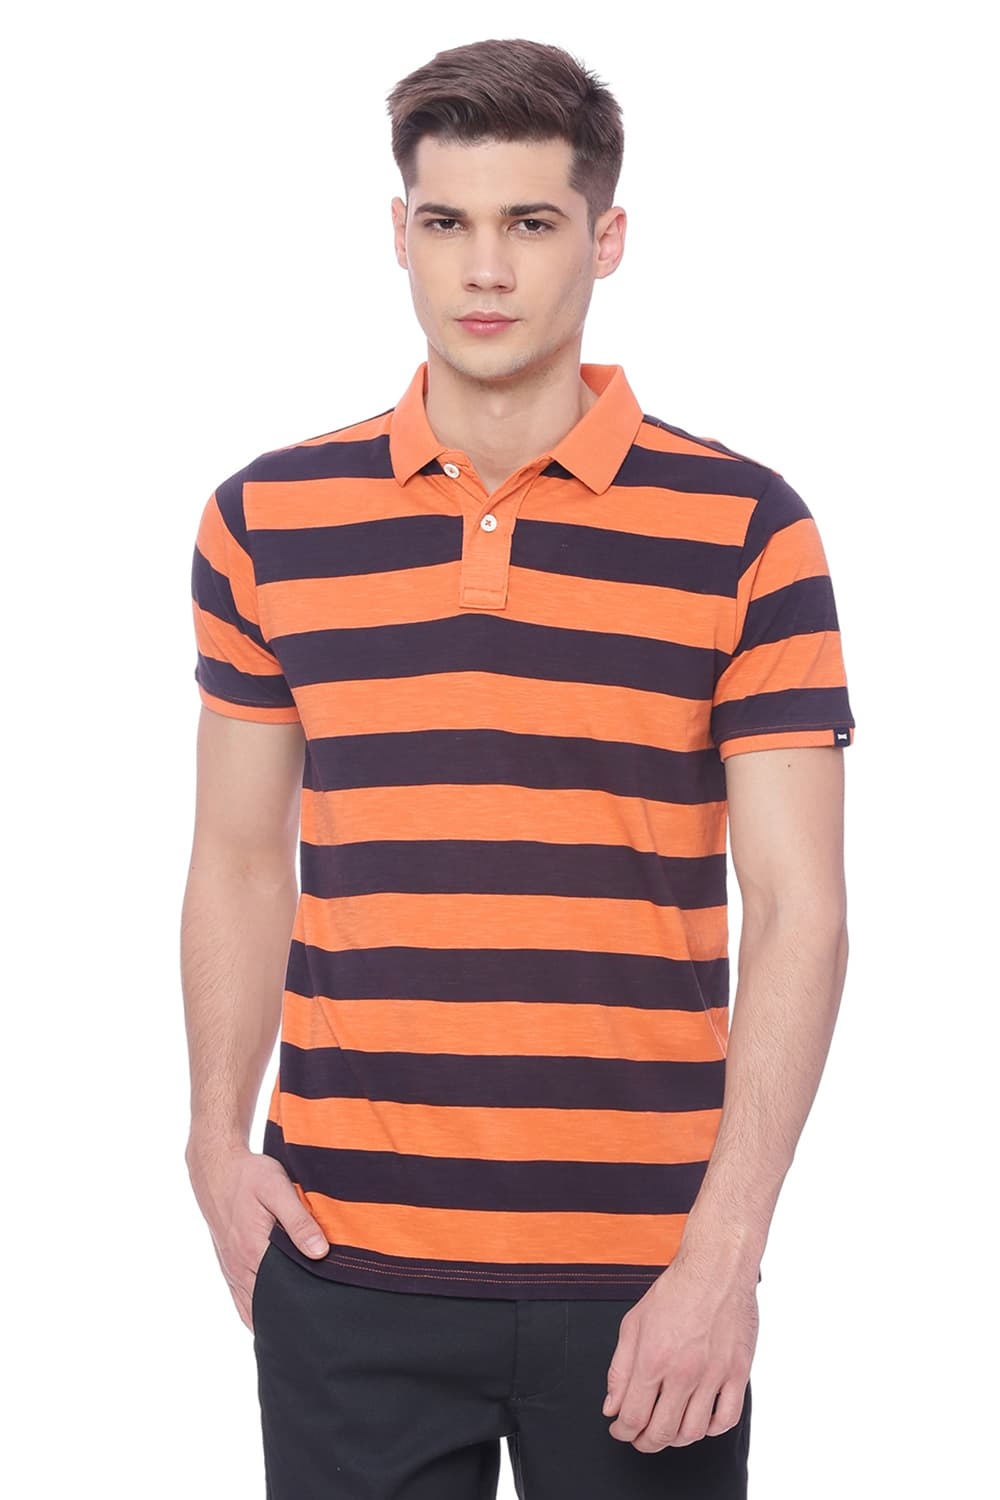 Basics | Basics Muscle Fit Carrot  Striped Rugby Polo T Shirt